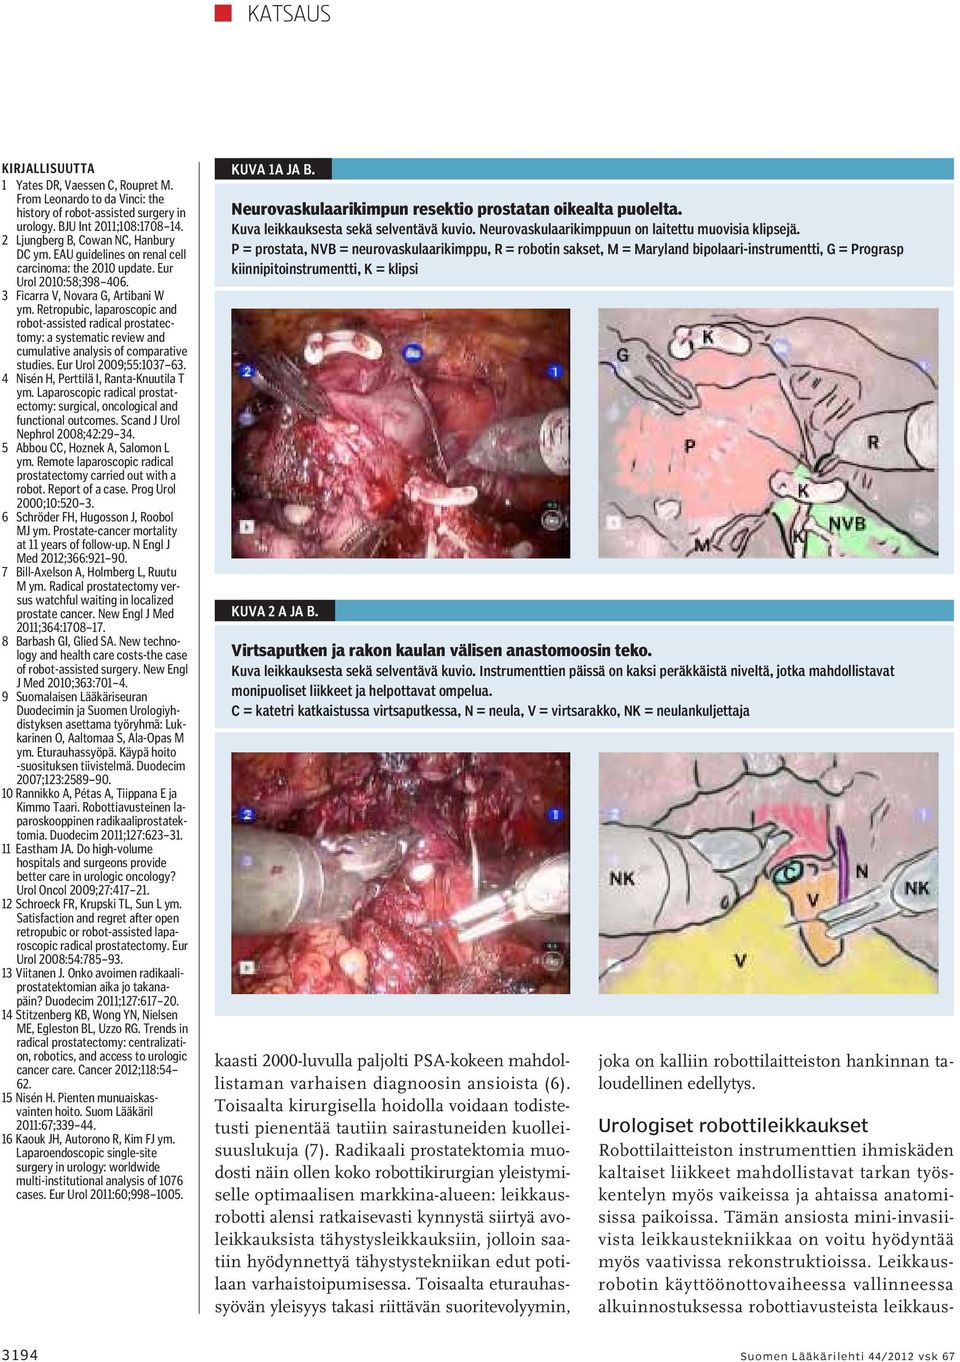 Retropubic, laparoscopic and robot-assisted radical prostatectomy: a systematic review and cumulative analysis of comparative studies. Eur Urol 2009;55:1037 63.